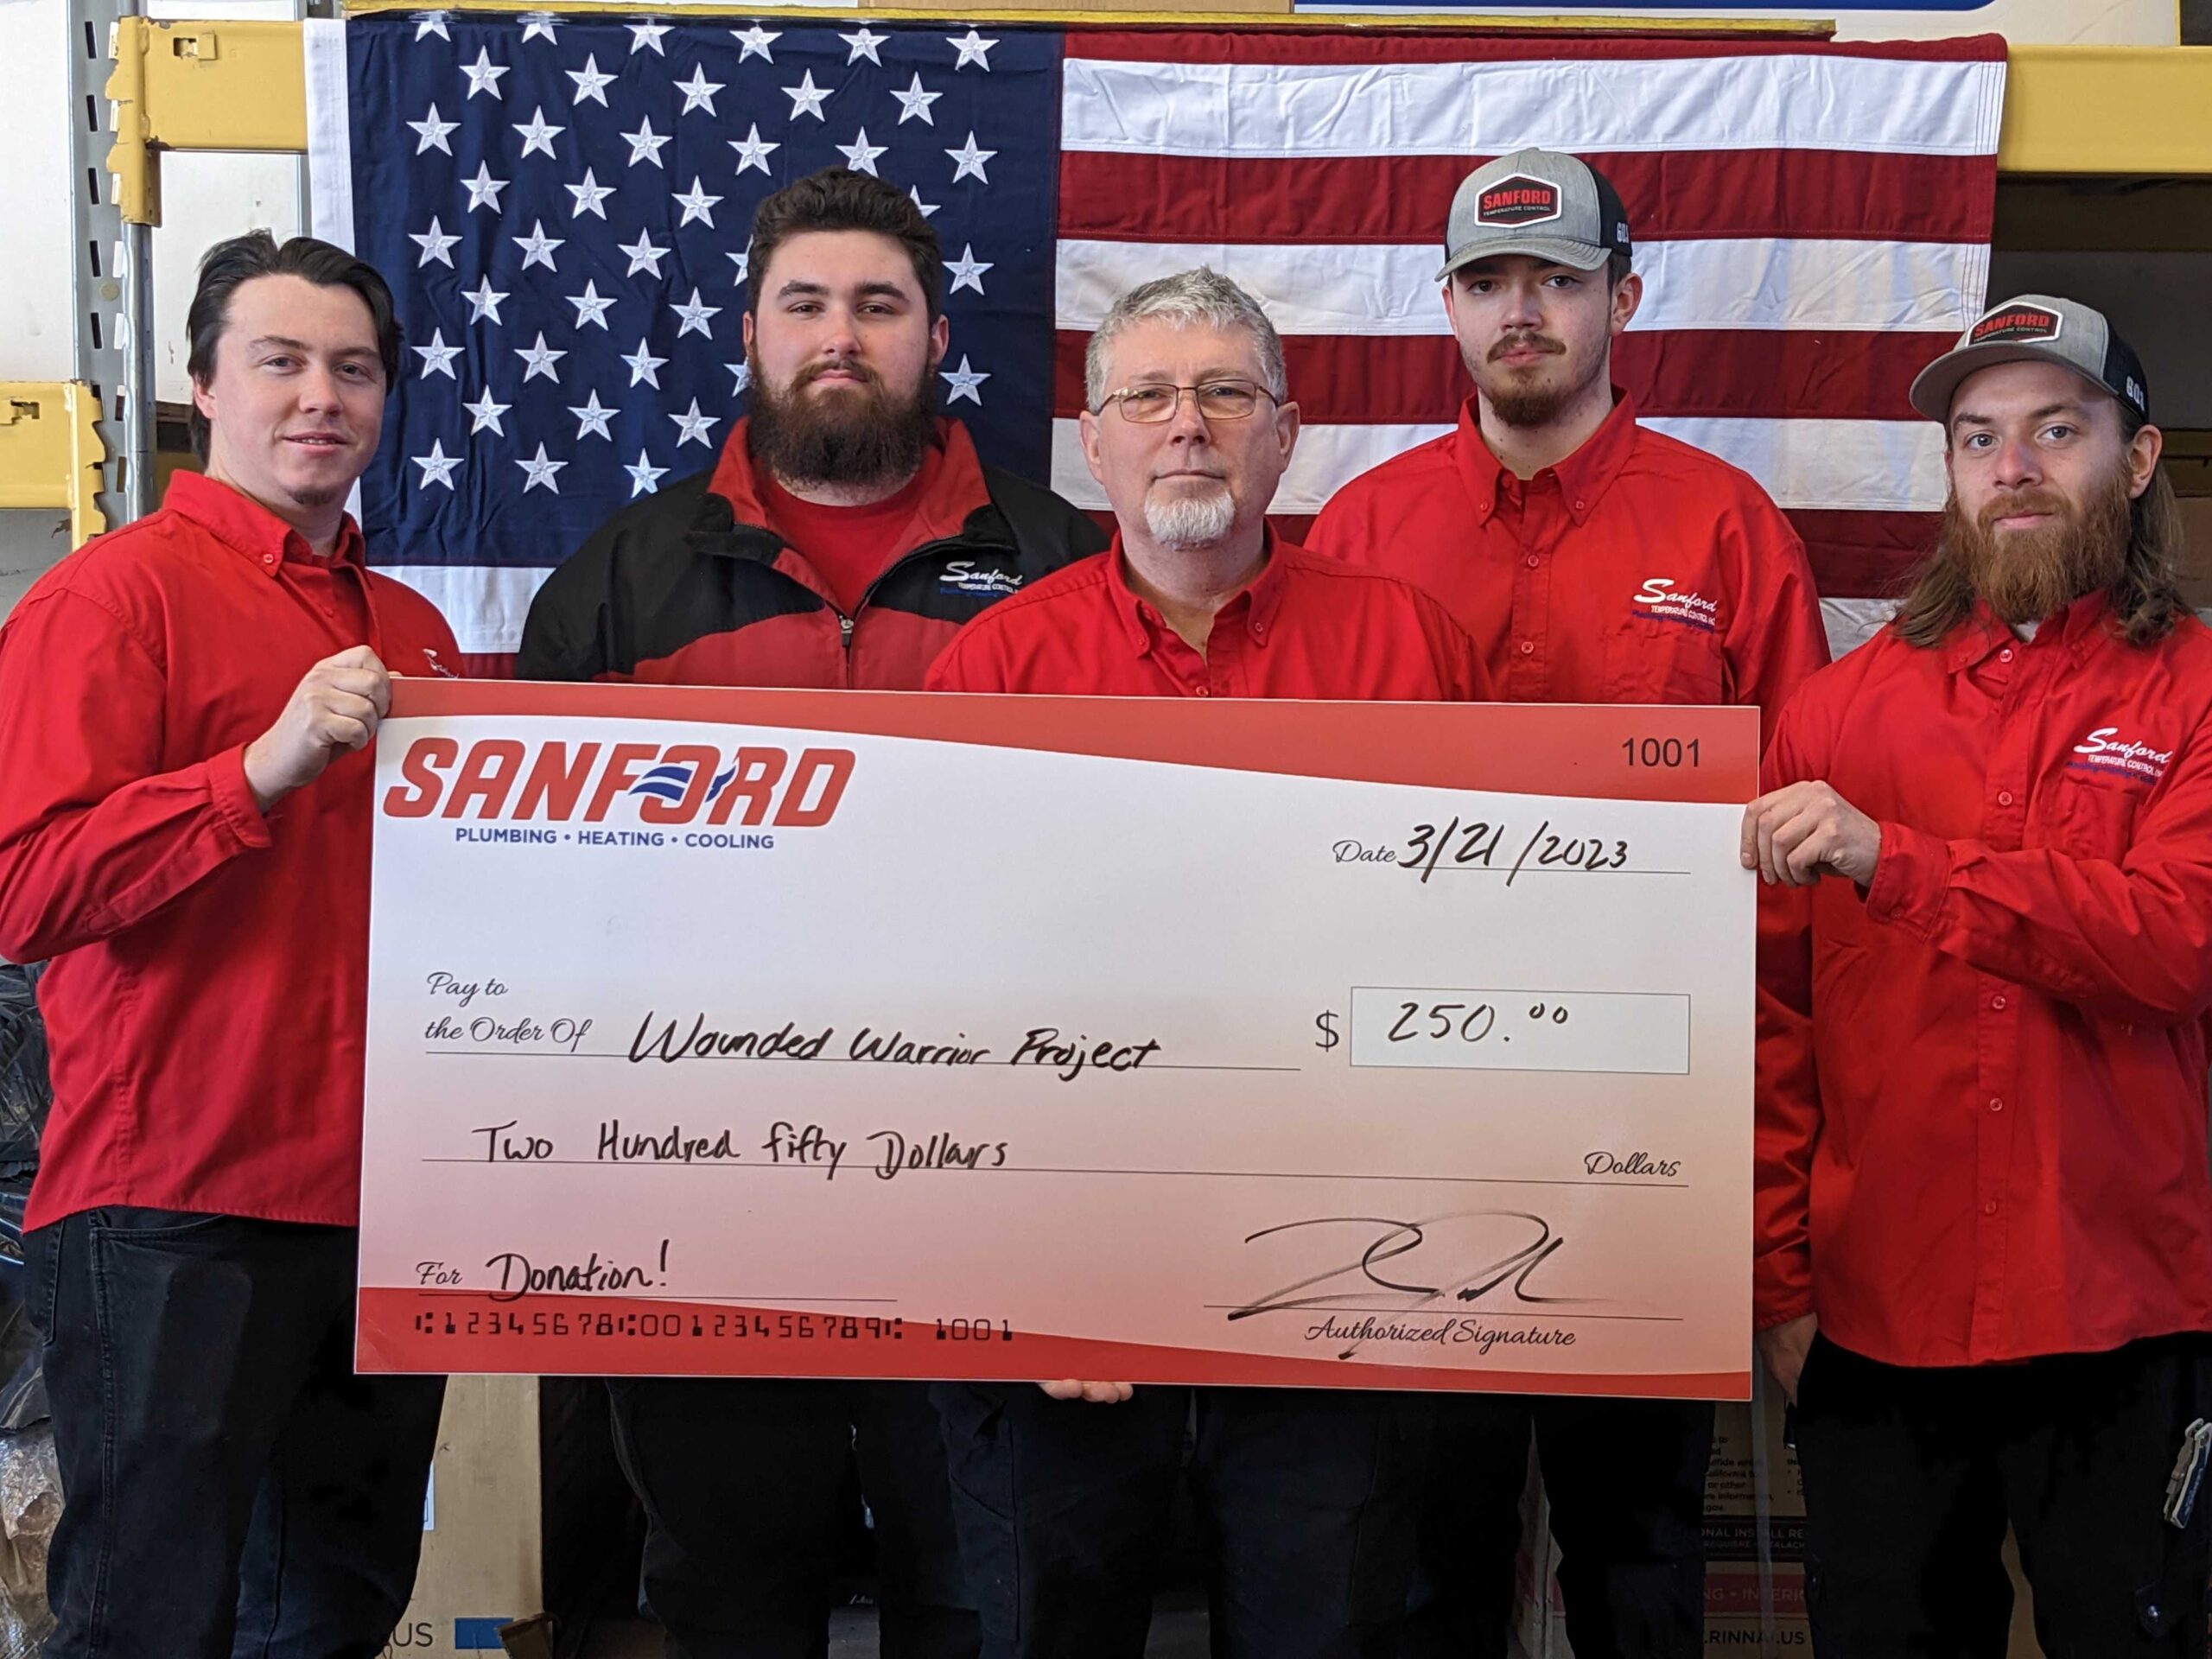 Sanford's Donation to Wounded Warrior Project